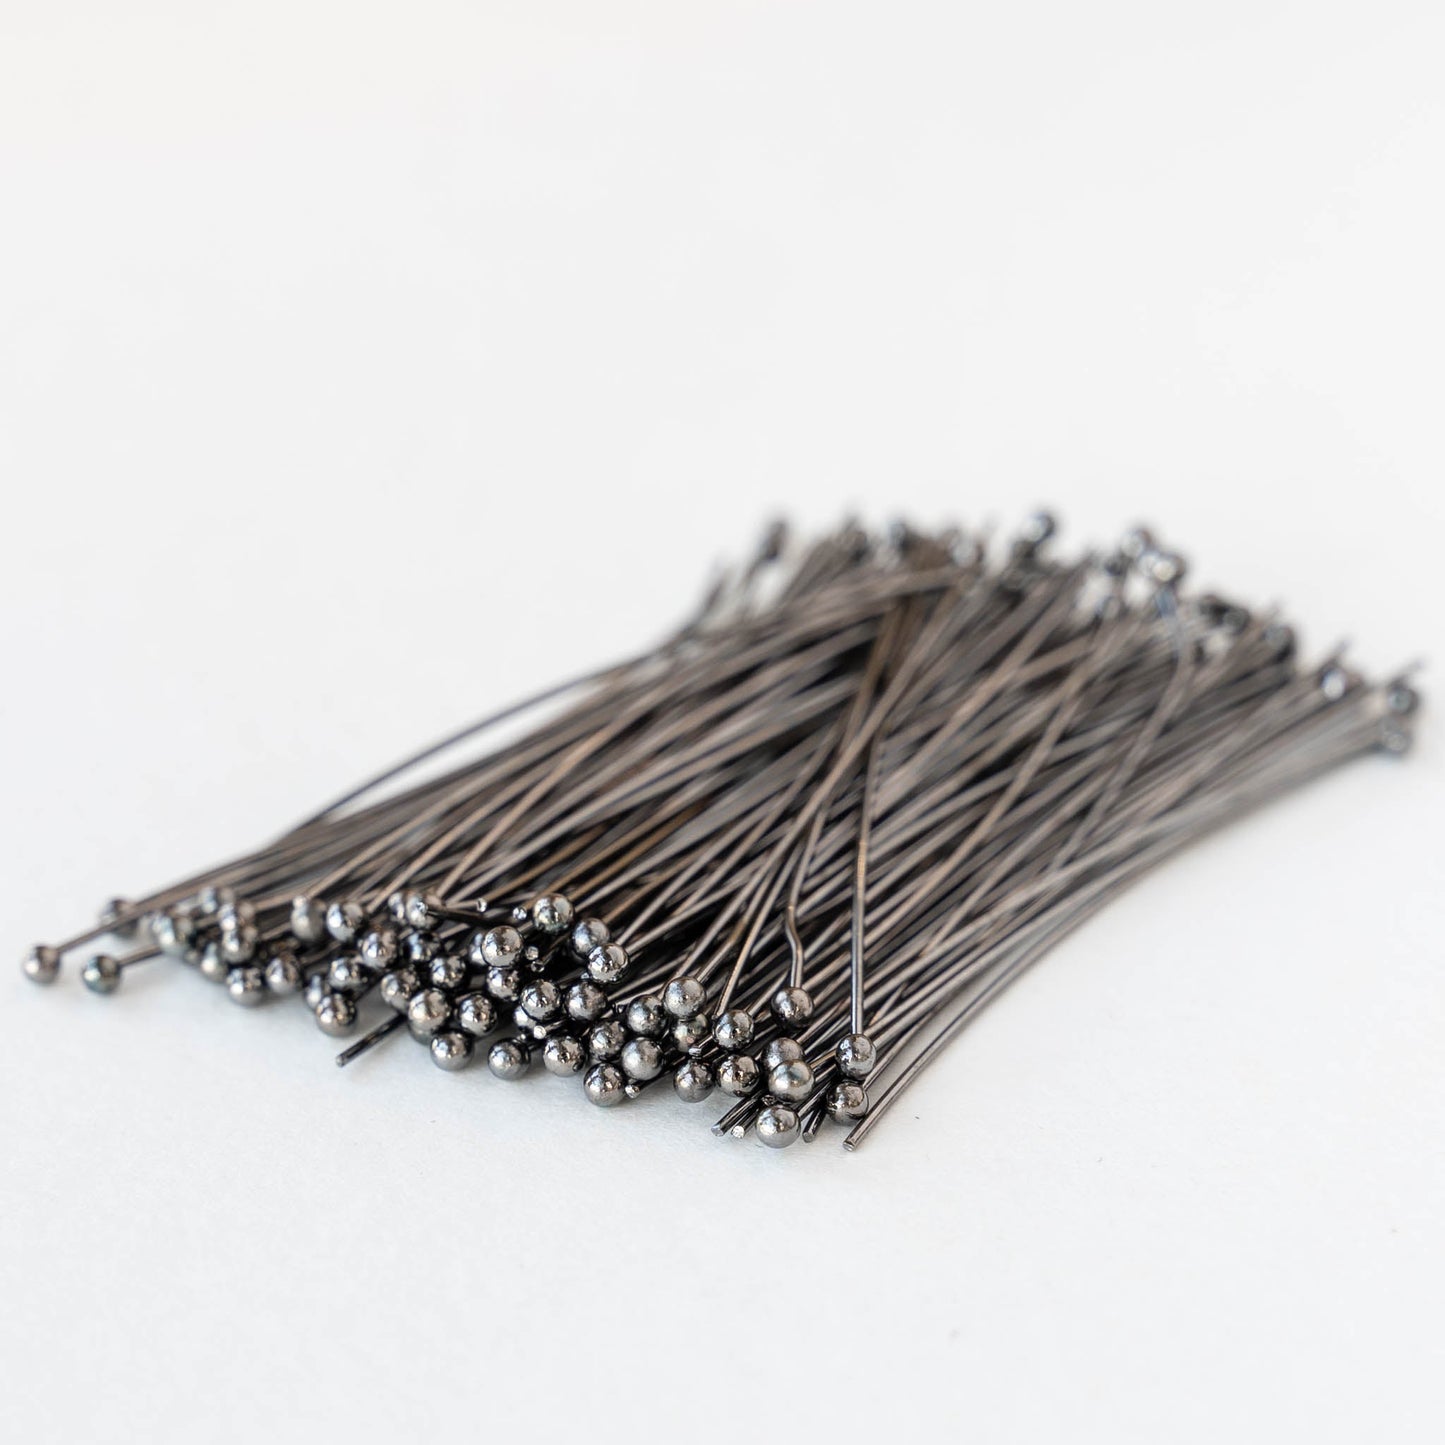 Load image into Gallery viewer, 22g Gunmetal Balled Headpins - 50
